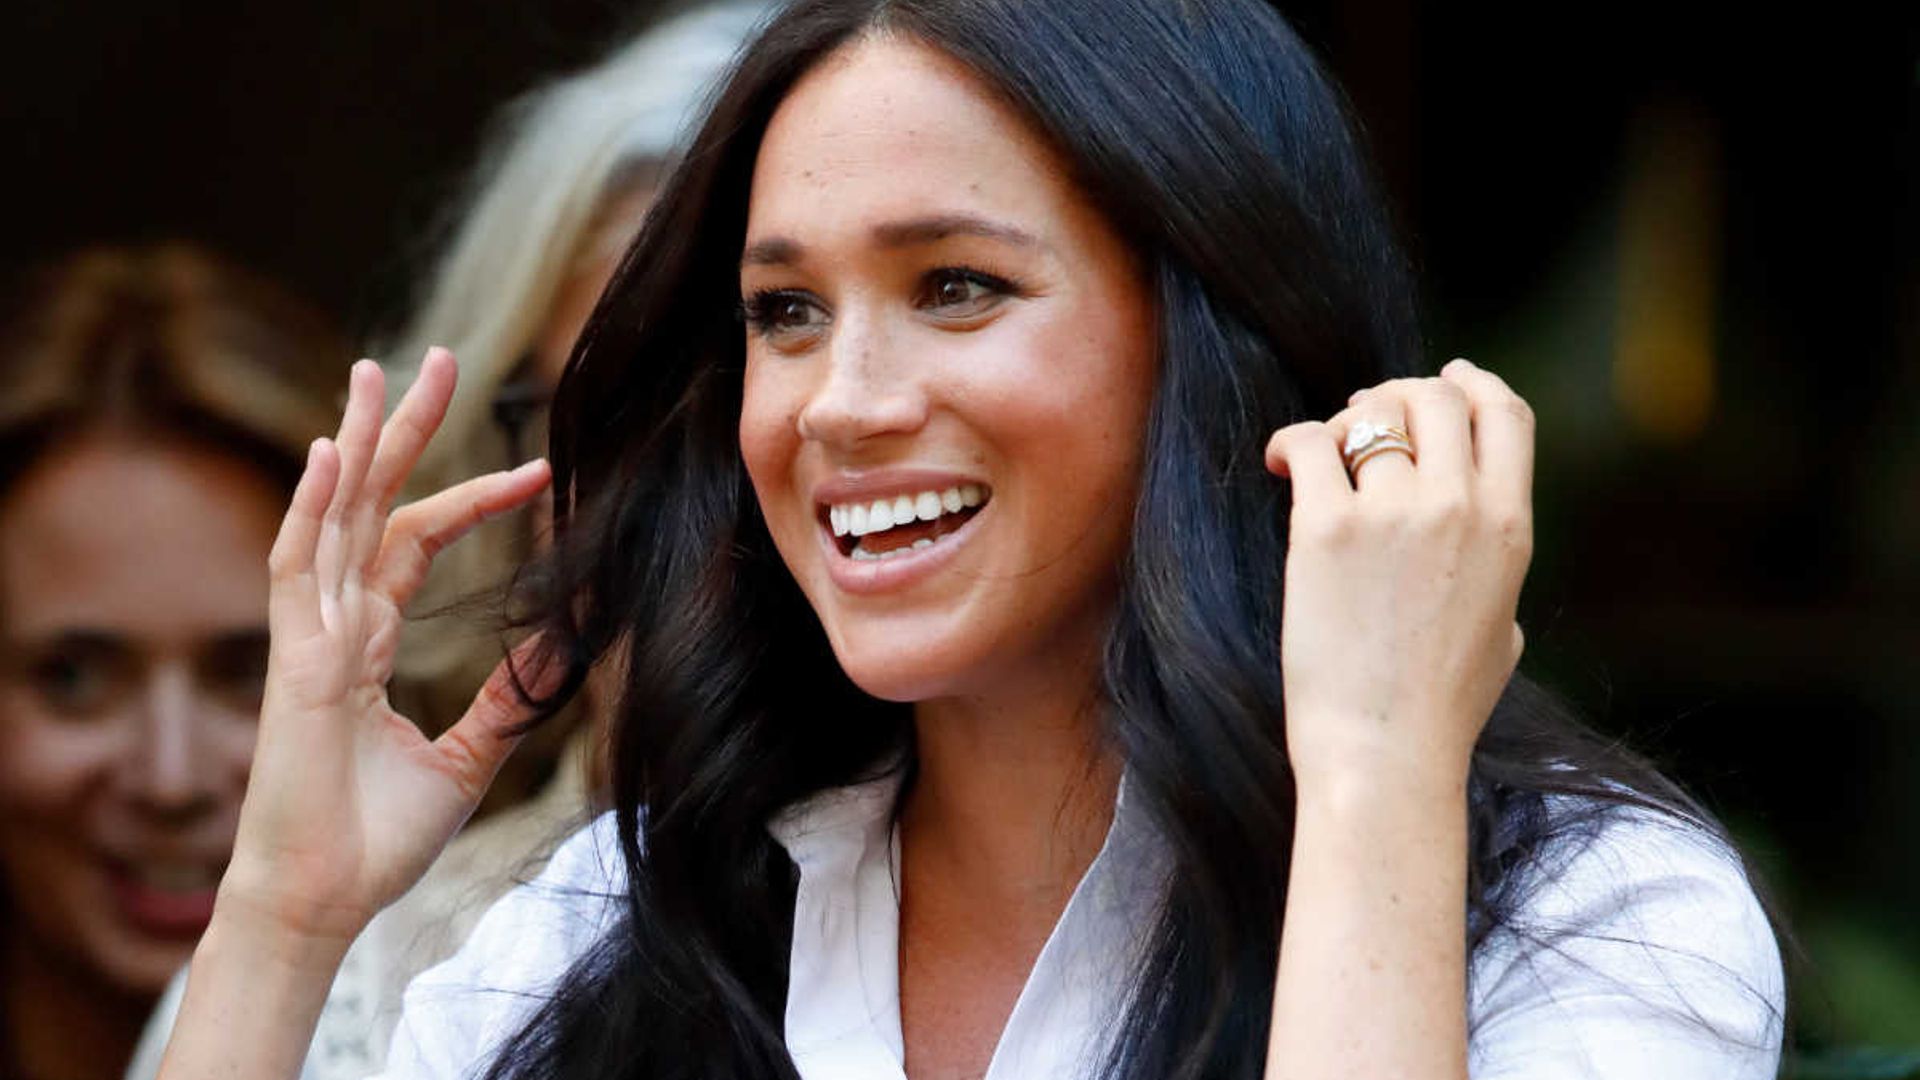 Meghan in a Summer Chic Look for Lunch with Gloria Steinem - What Meghan  Wore